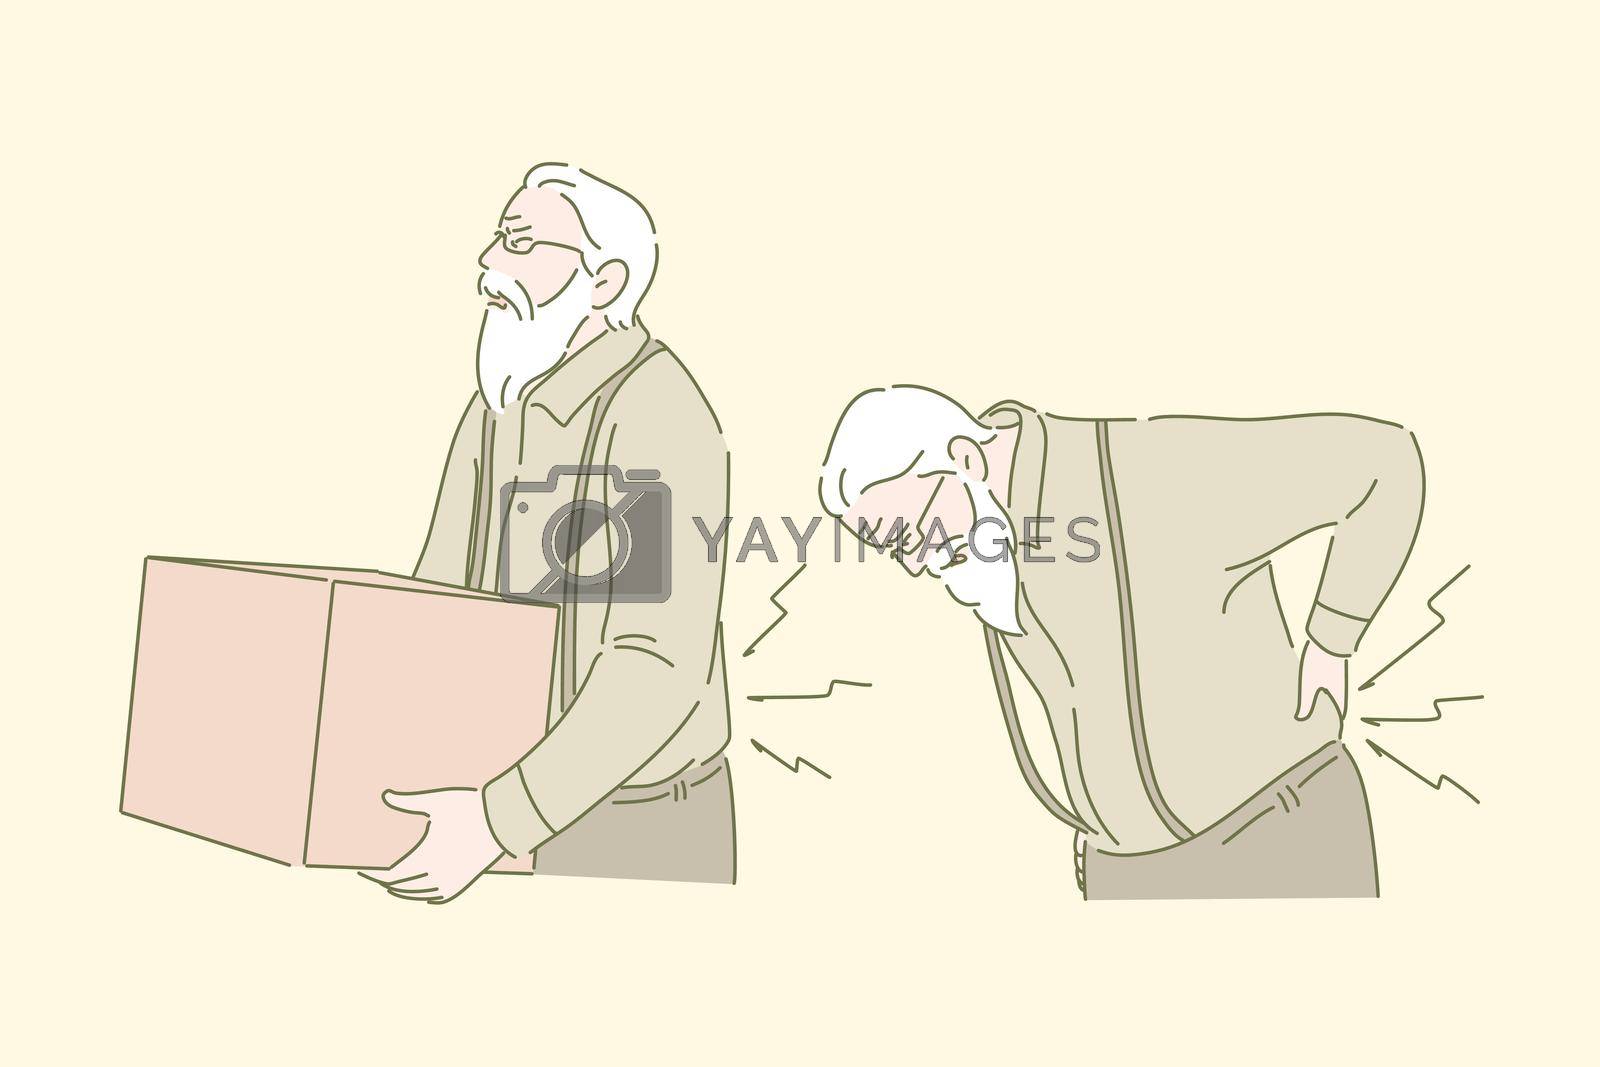 Weight lifting, back ache, healthcare concept. Senile disease, medical contraindication, old man with box, grandfather carrying heavy load, graybeard suffering from pain. Simple flat vector